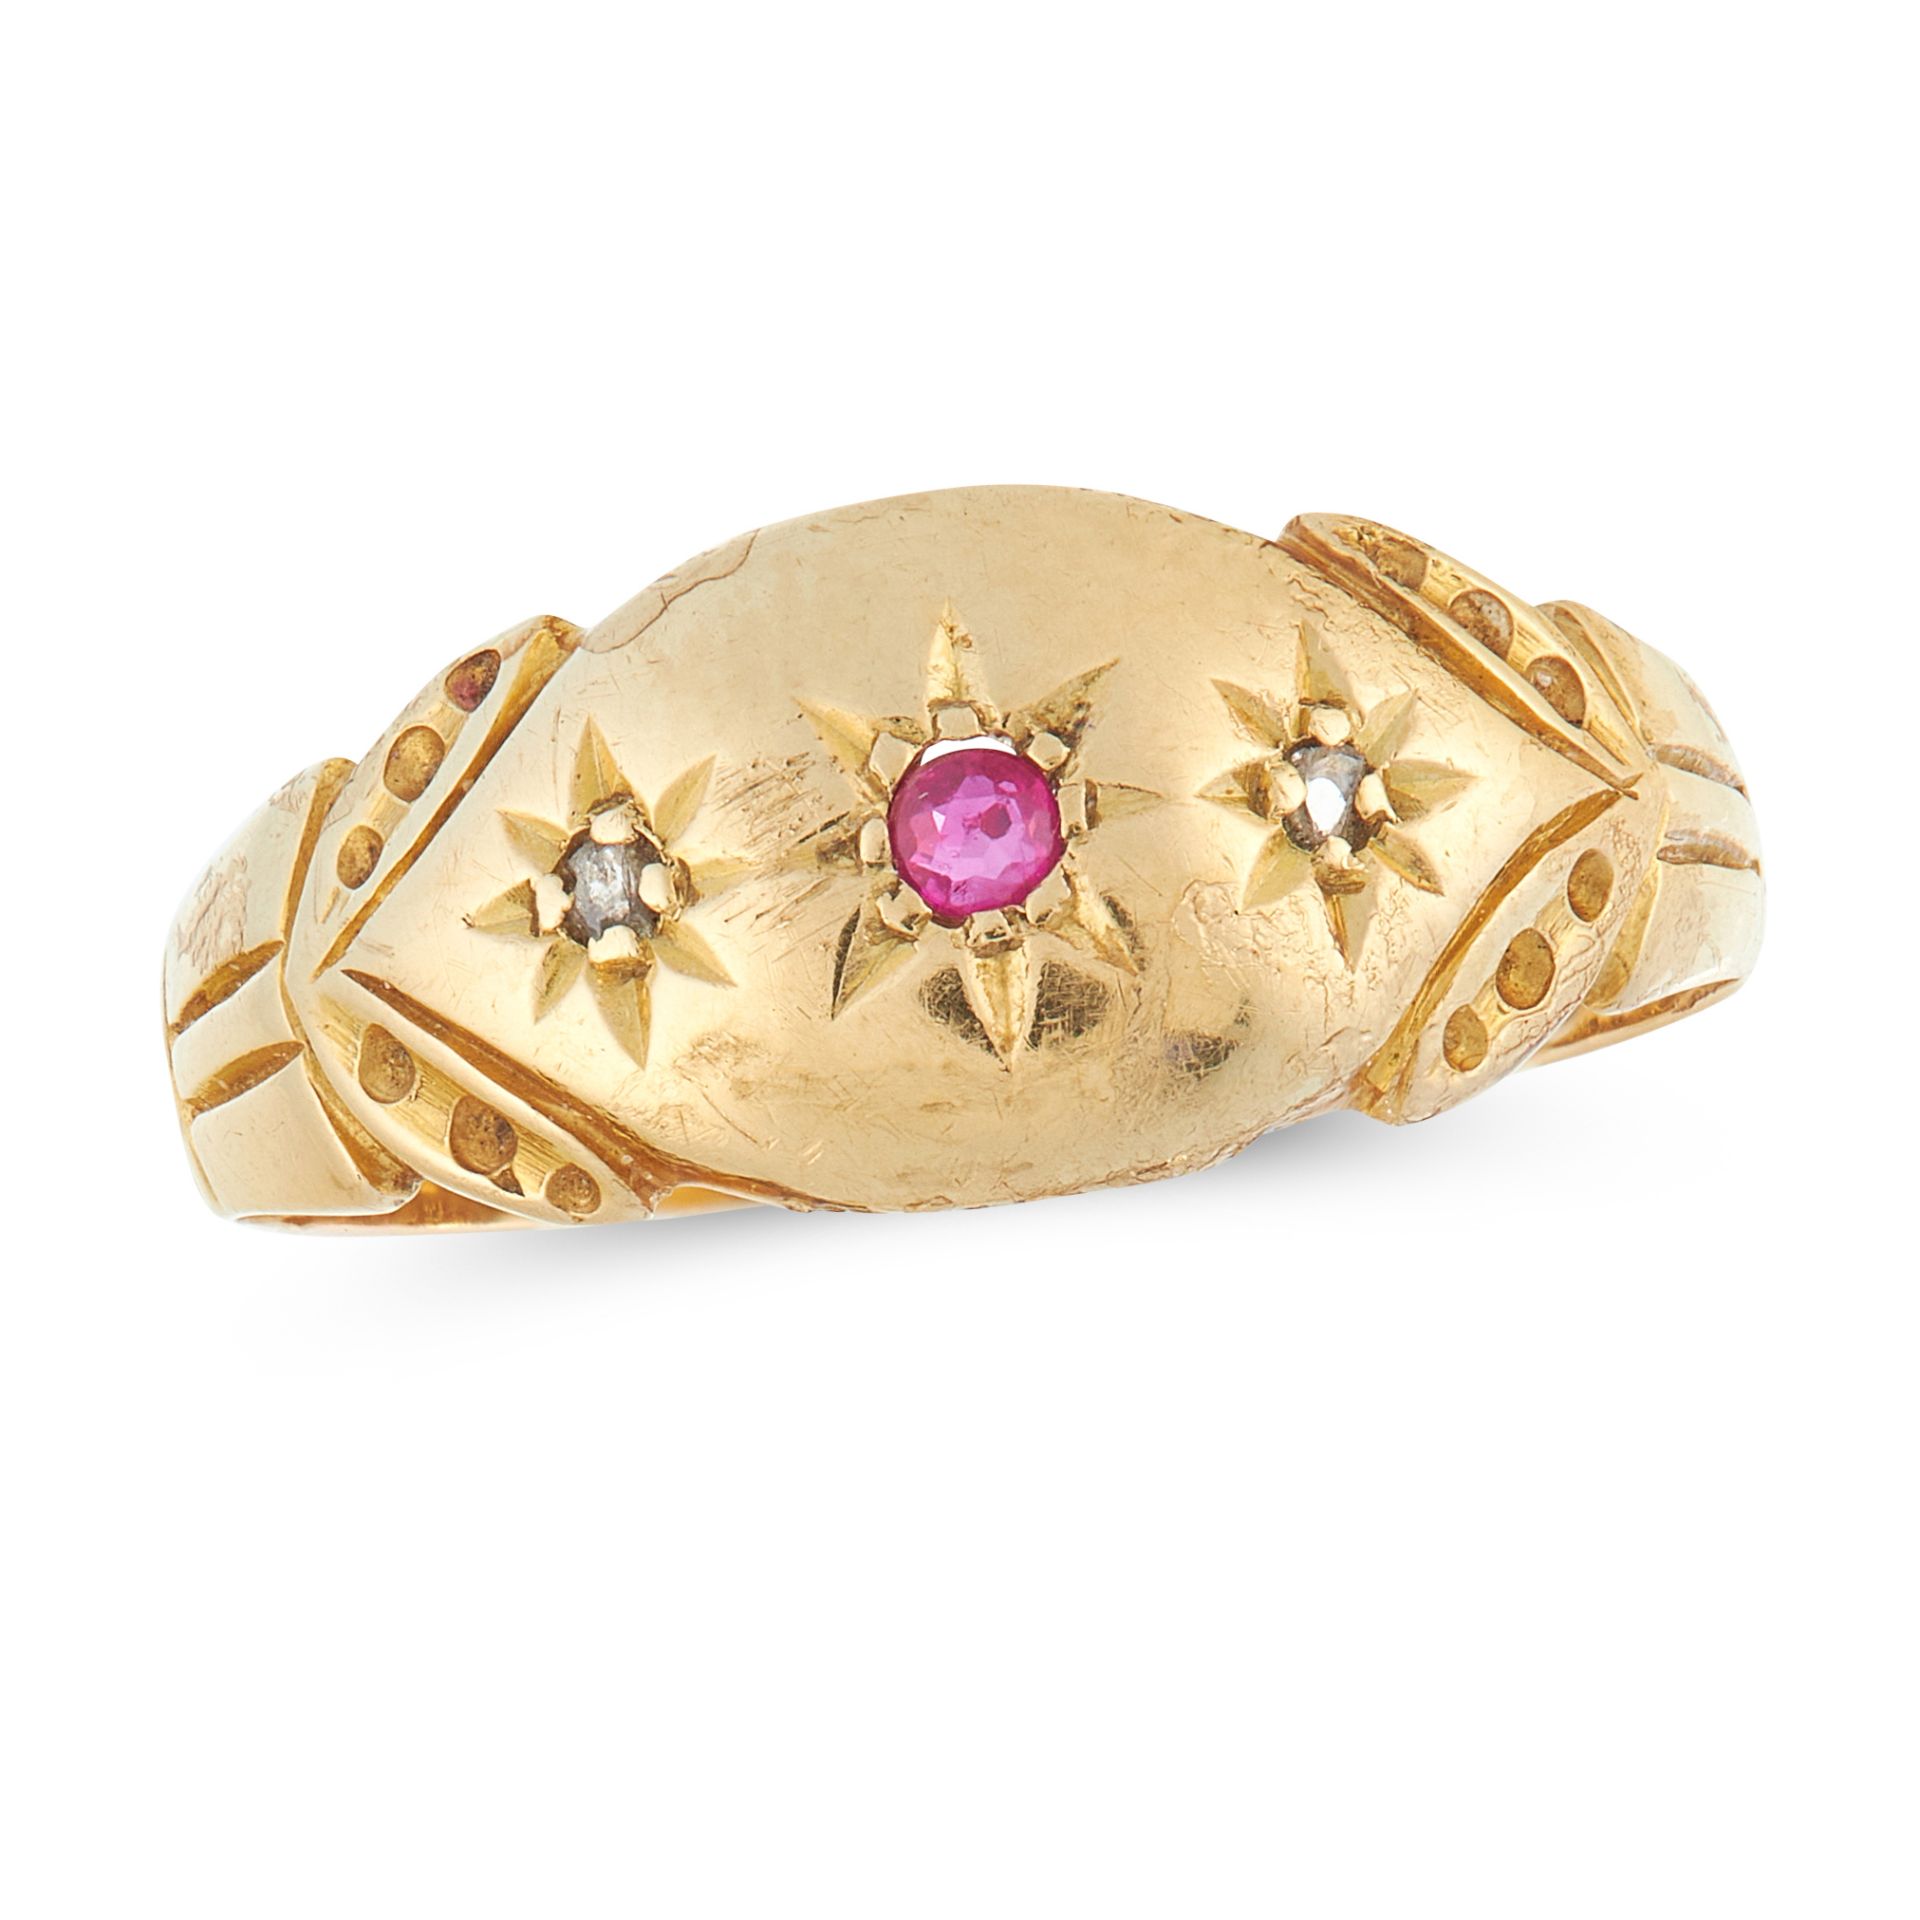 AN ANTIQUE RUBY AND DIAMOND RING in 18ct yellow gold, the gold face is set with a round cut ruby and